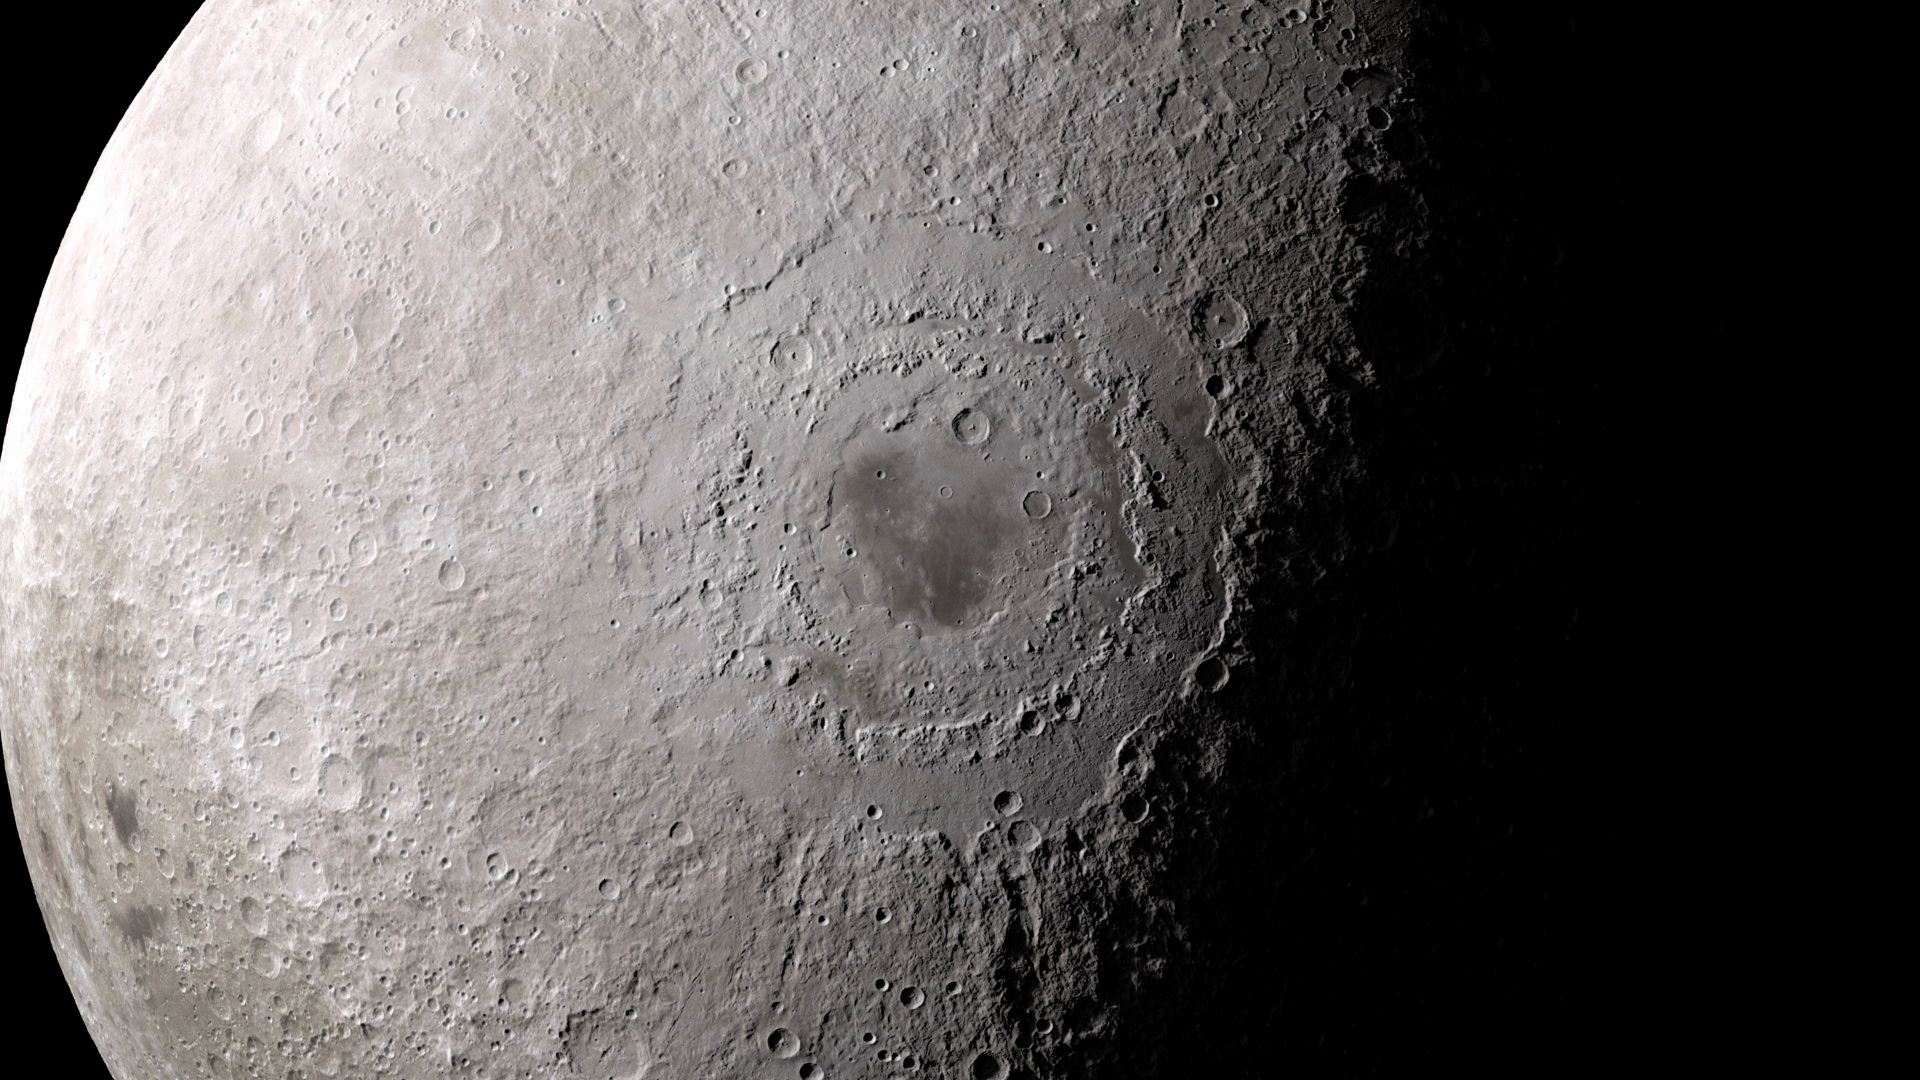 As large moon craters go, the giant bull's-eye called Orientale basin is thought to be young, likely the moon's last major body blow.